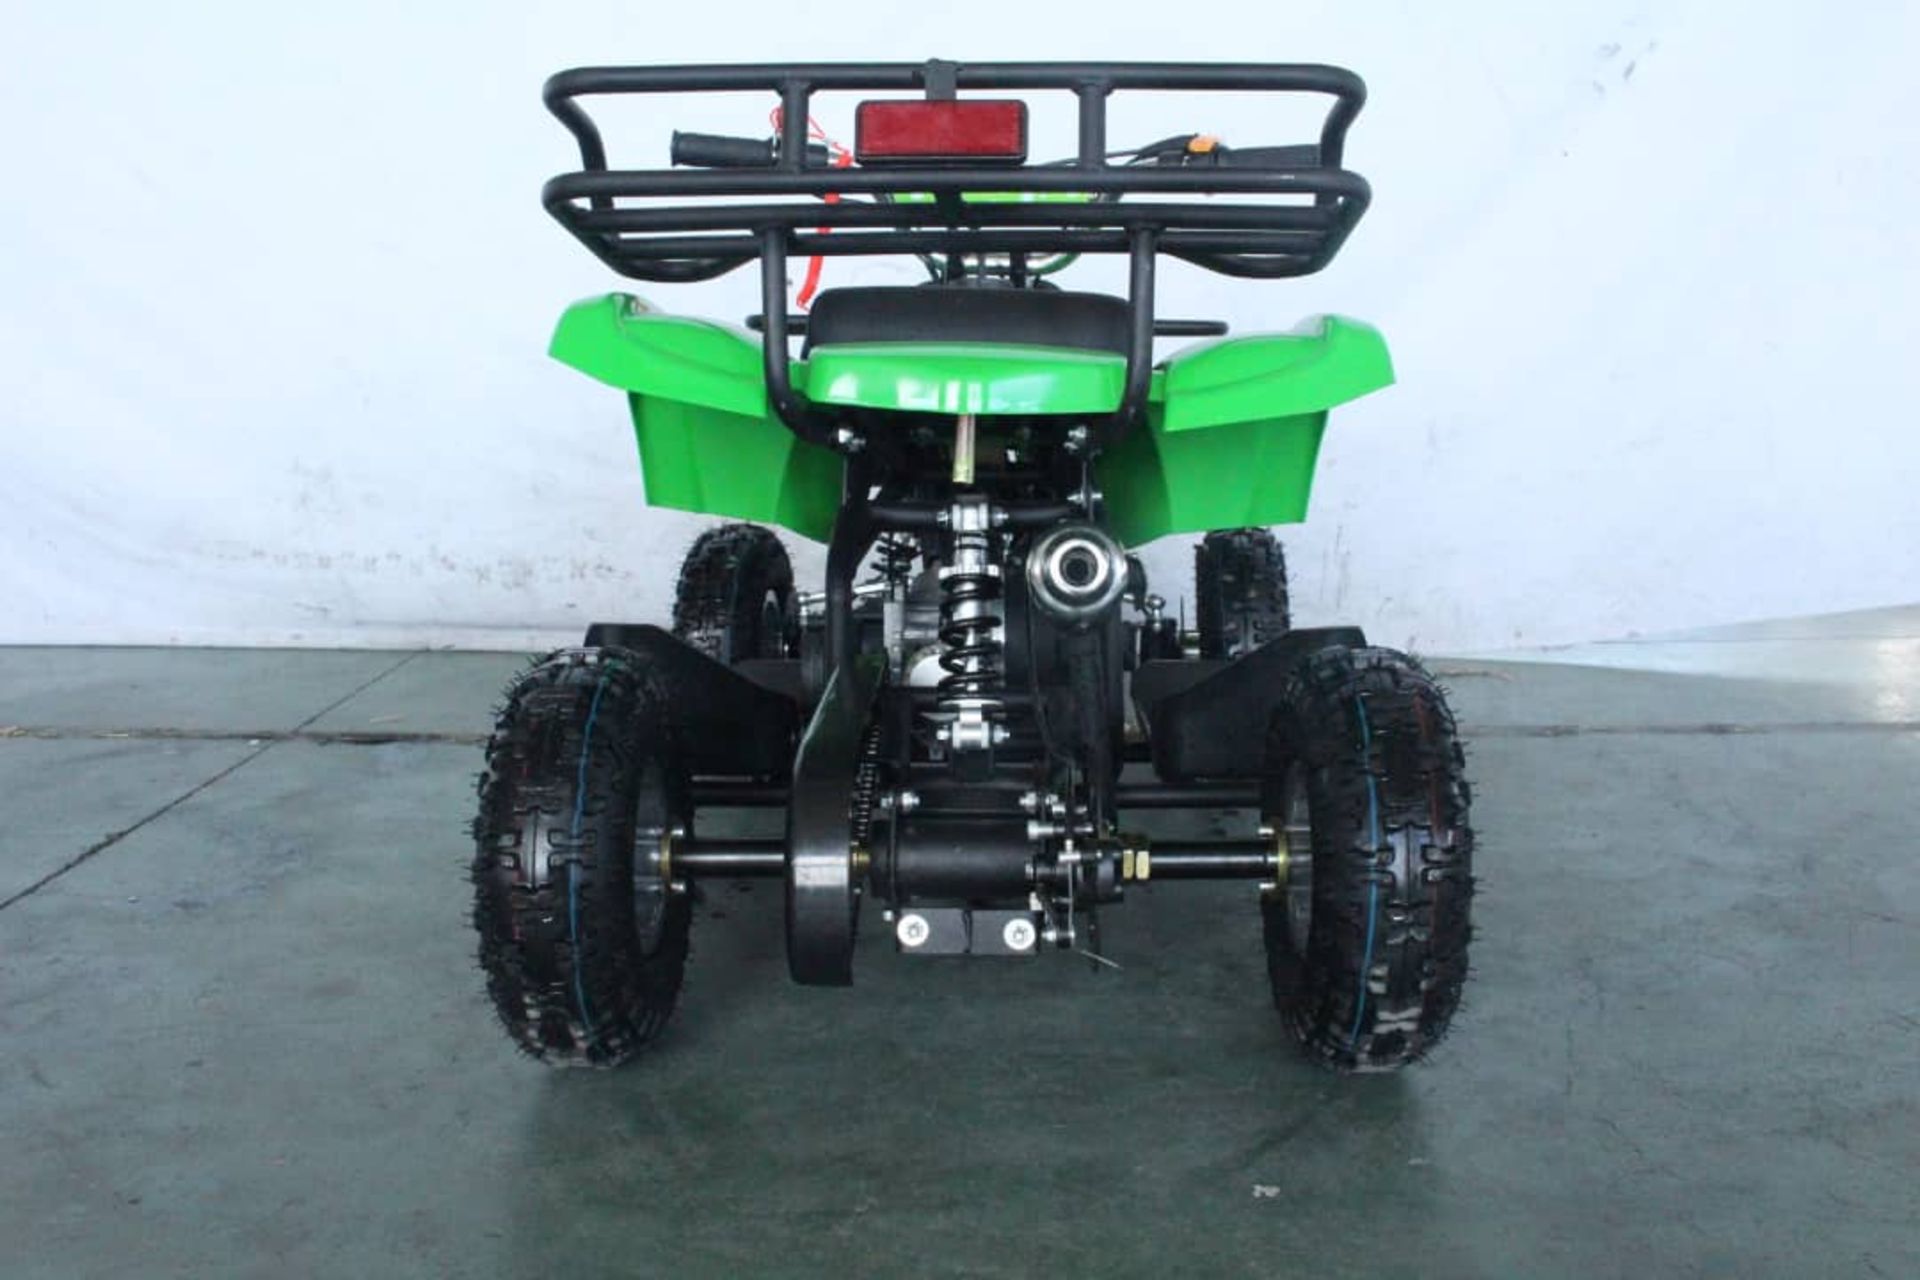 + VAT Brand New 50cc Mini Quad Bike FRM - Colours May Vary - Picture May Vary From Actual Item - Image 7 of 9